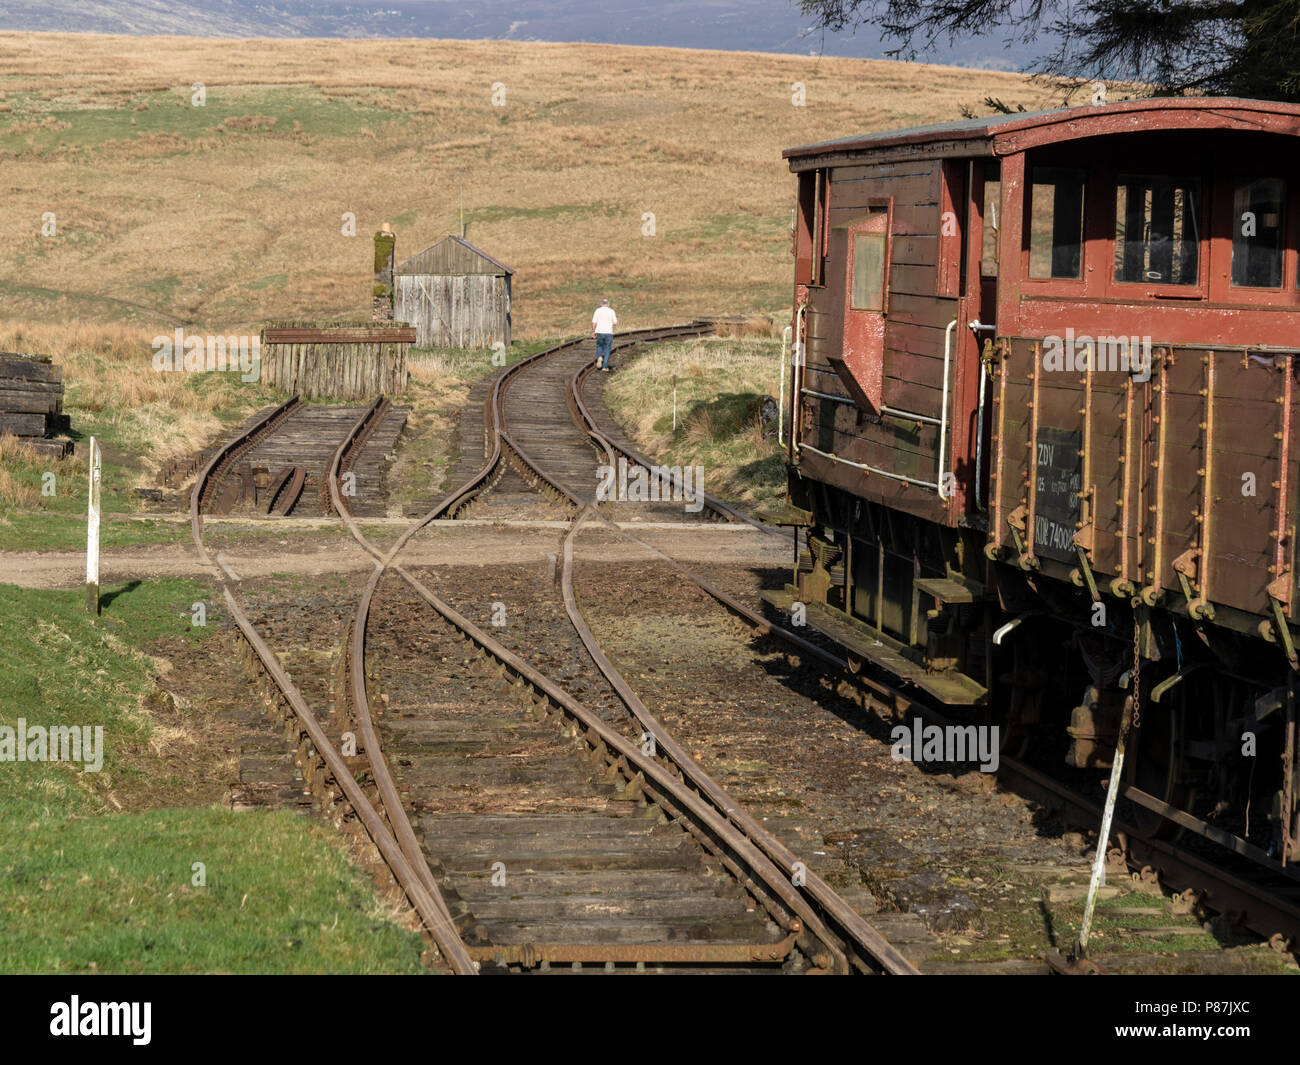 Saughtree, two miles from the Scottish border with England, in Liddesdale, Roxburghshire, north of Kielder Forest, Cheviot hills. The old railway stat Stock Photo